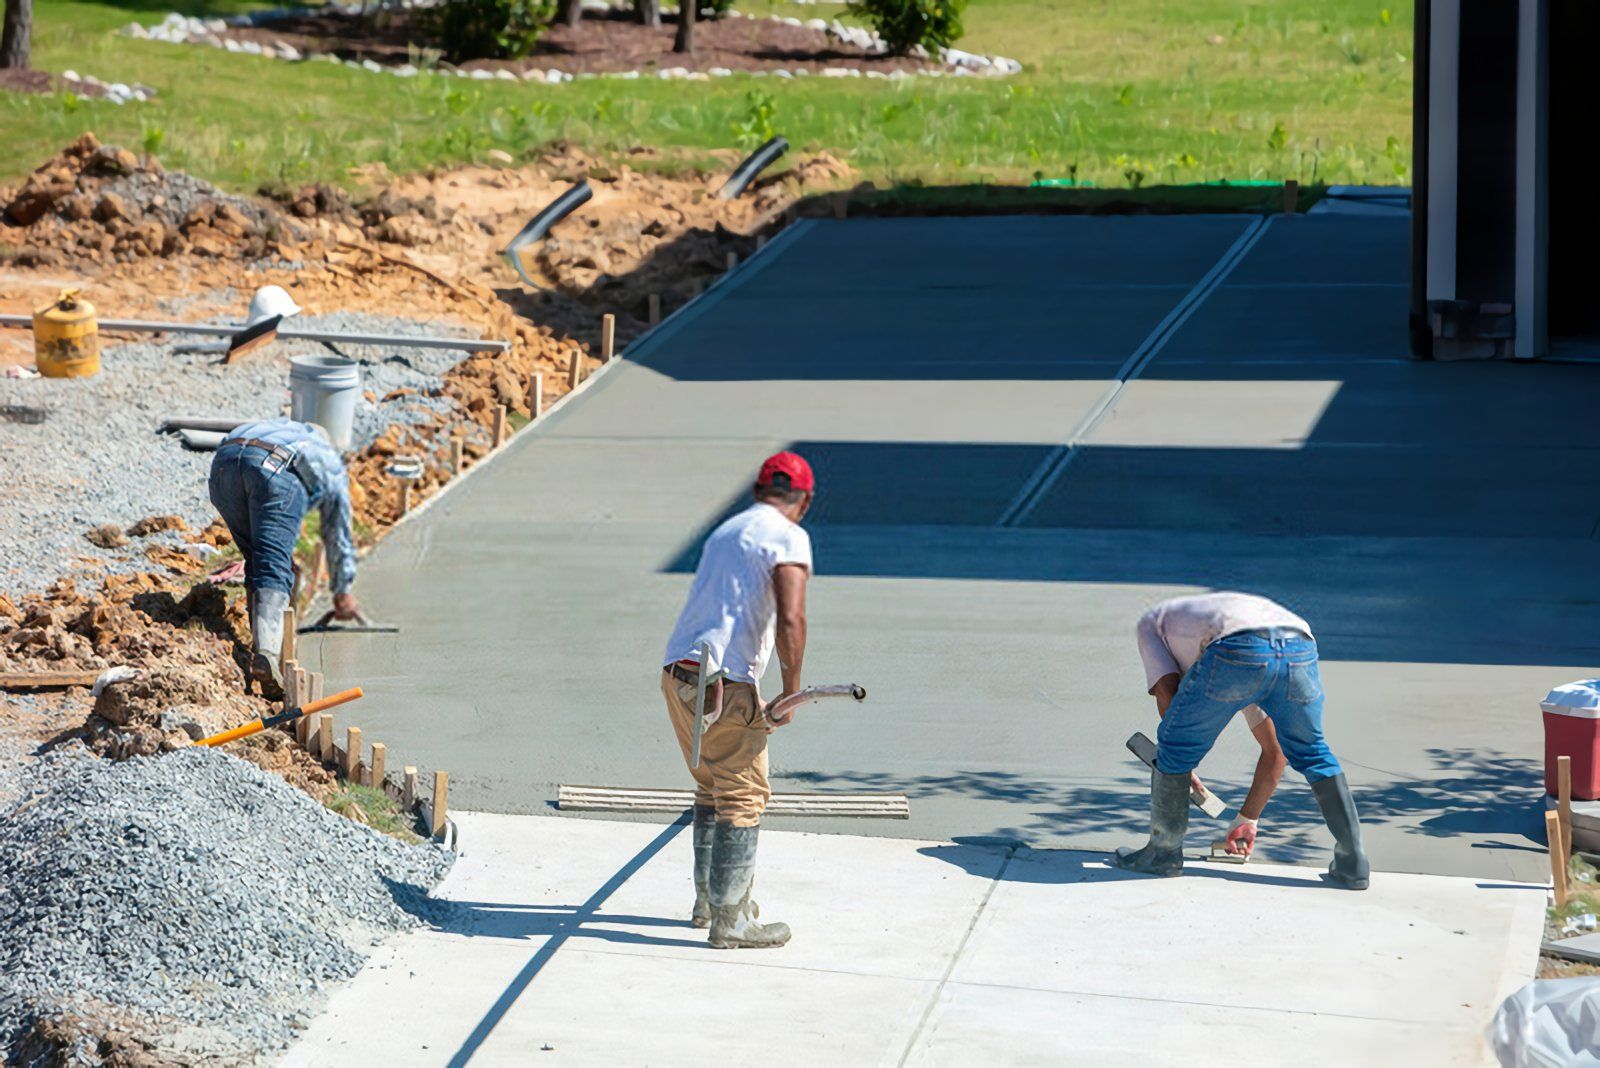 Three construction workers wearing casual clothing and boots are smoothing freshly poured decorative concrete on a driveway. The area around them, typical of West Palm Beach FL, is a mix of materials including gravel and dirt, with some equipment and tools visible. In the background, grass and a partially shaded area can be seen.